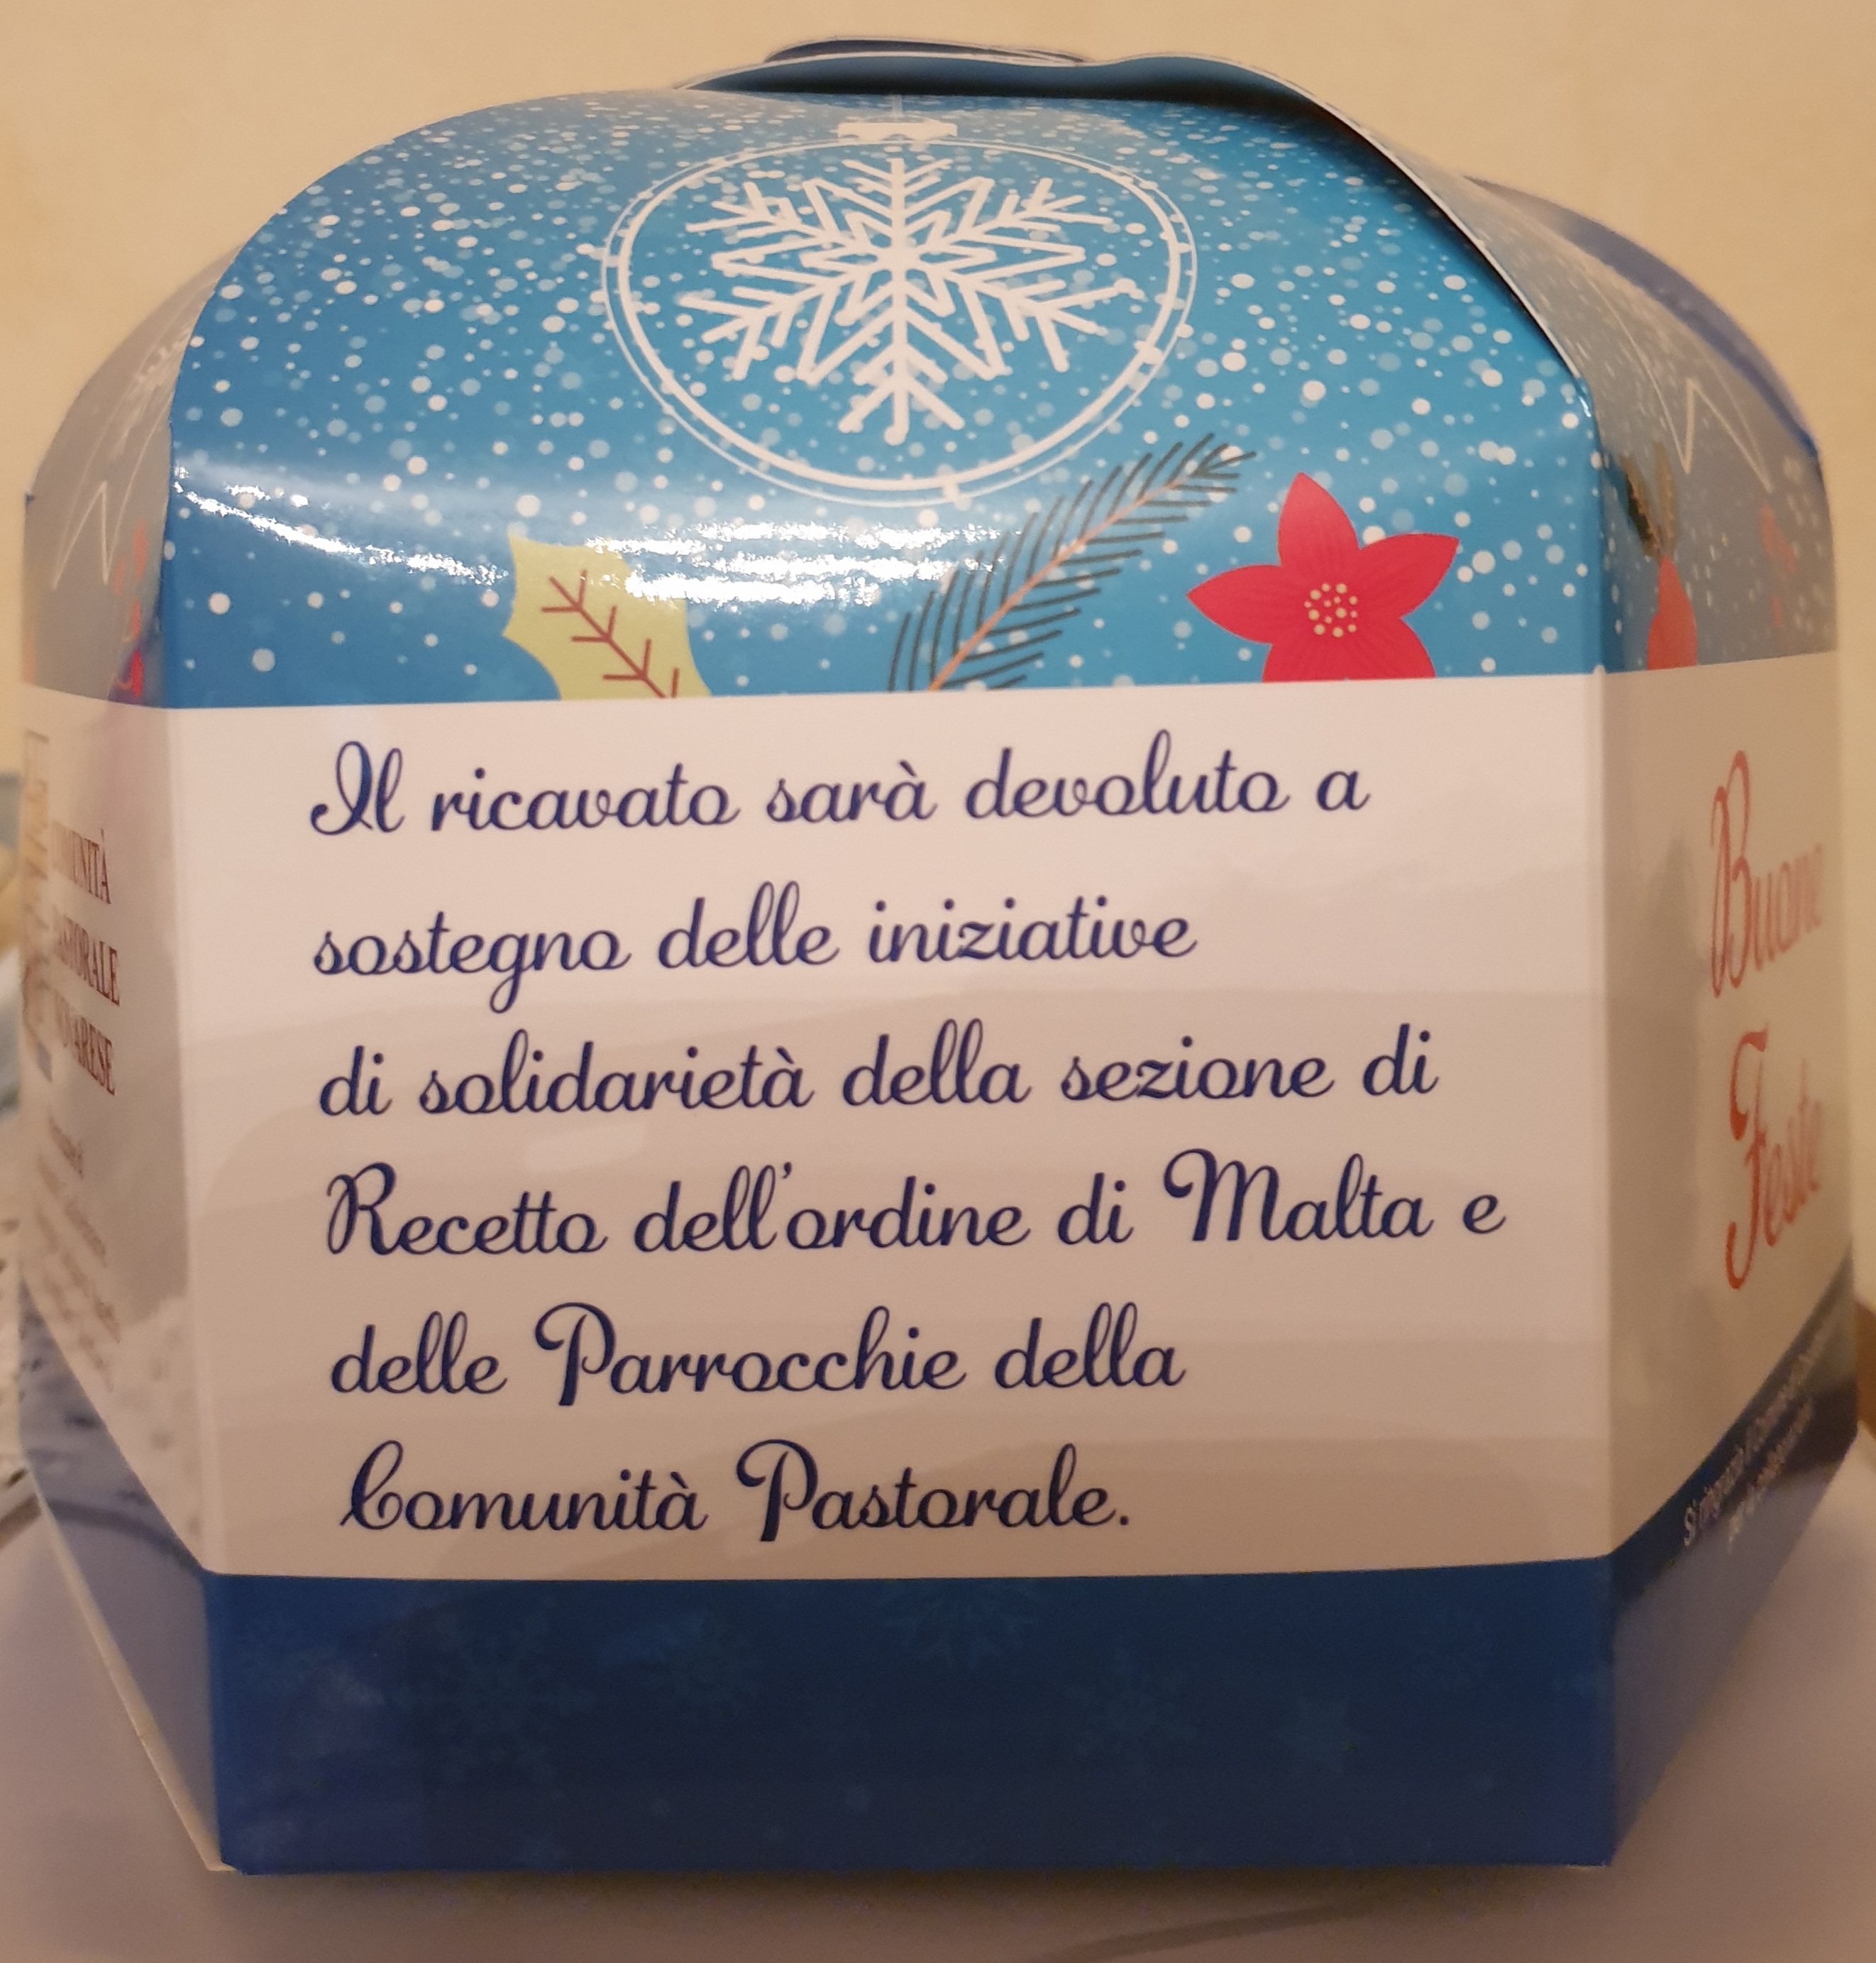 <span  class="uc_style_uc_tiles_grid_image_elementor_uc_items_attribute_title" style="color:#ffffff;">Panettone con dedica</span>